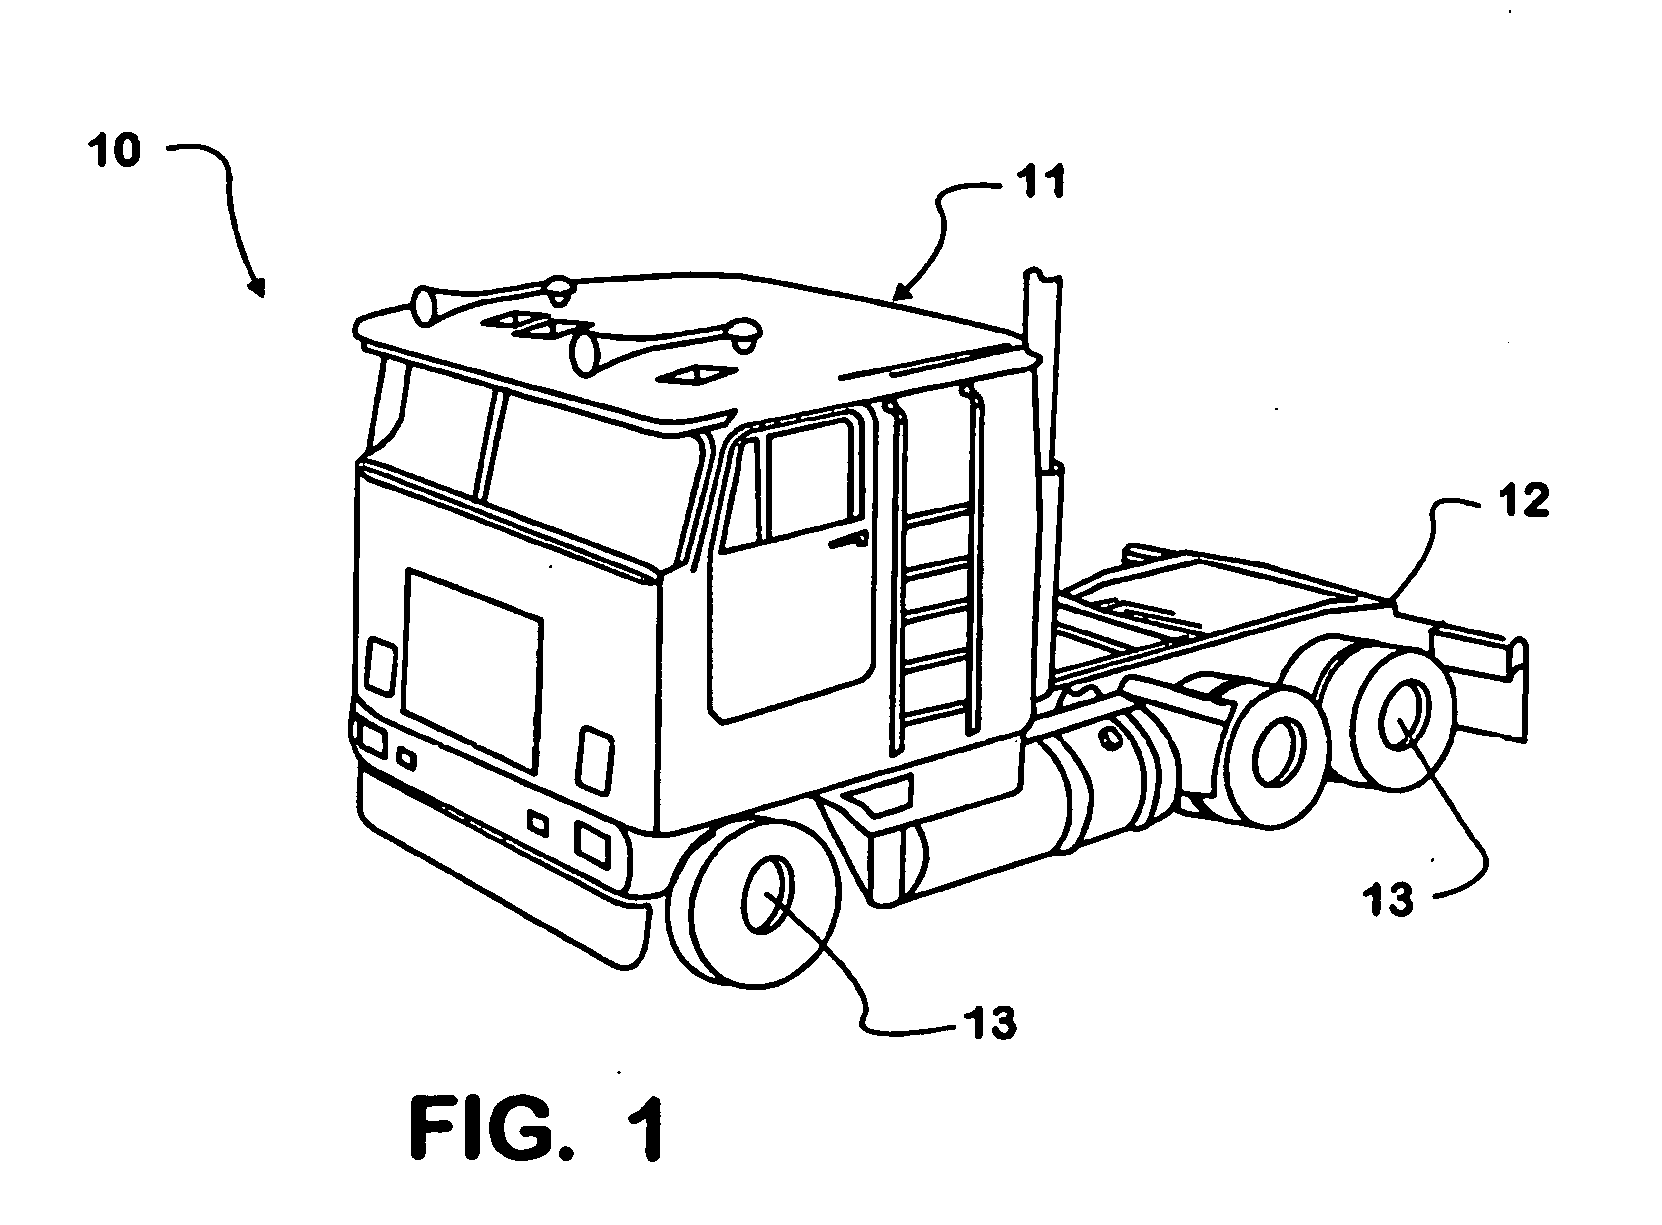 Engine based kinetic energy recovery system for vehicles